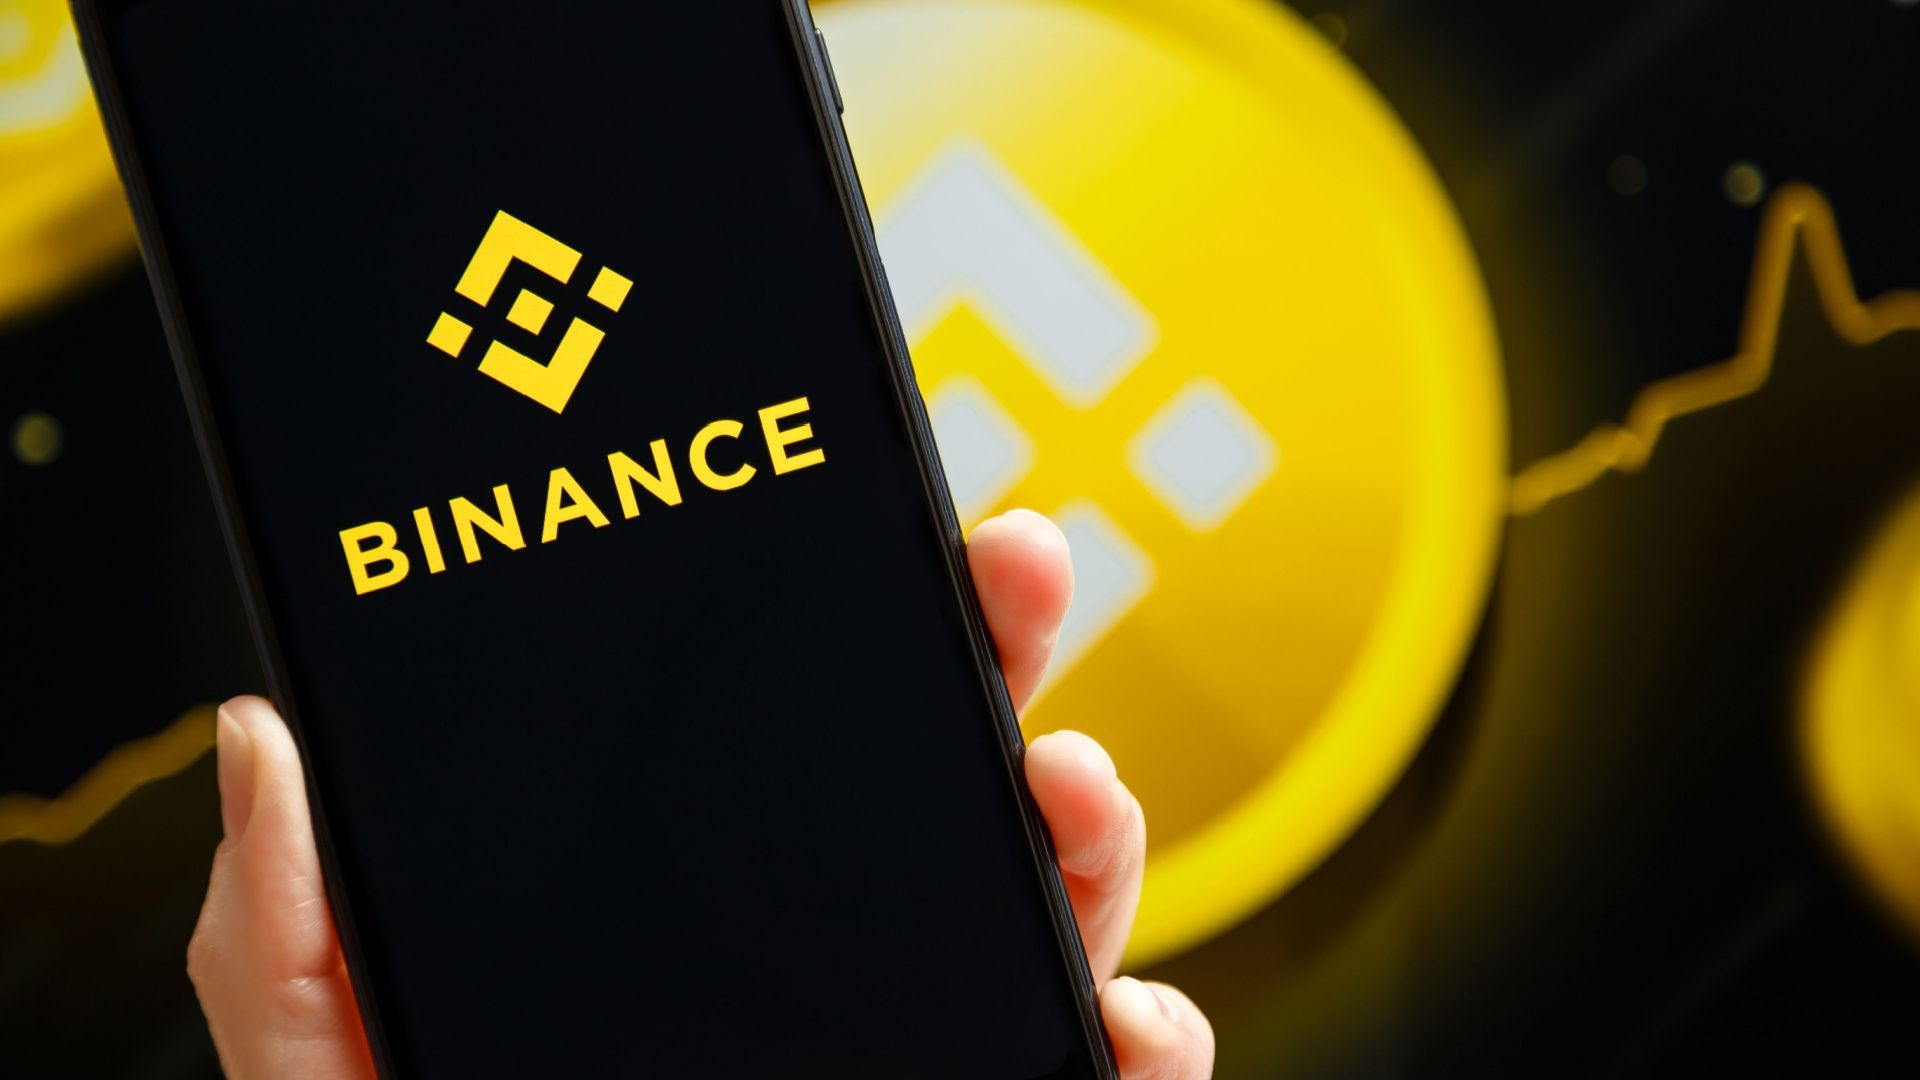 Binance WOTD: Word of the day answers (March 3, 2023)